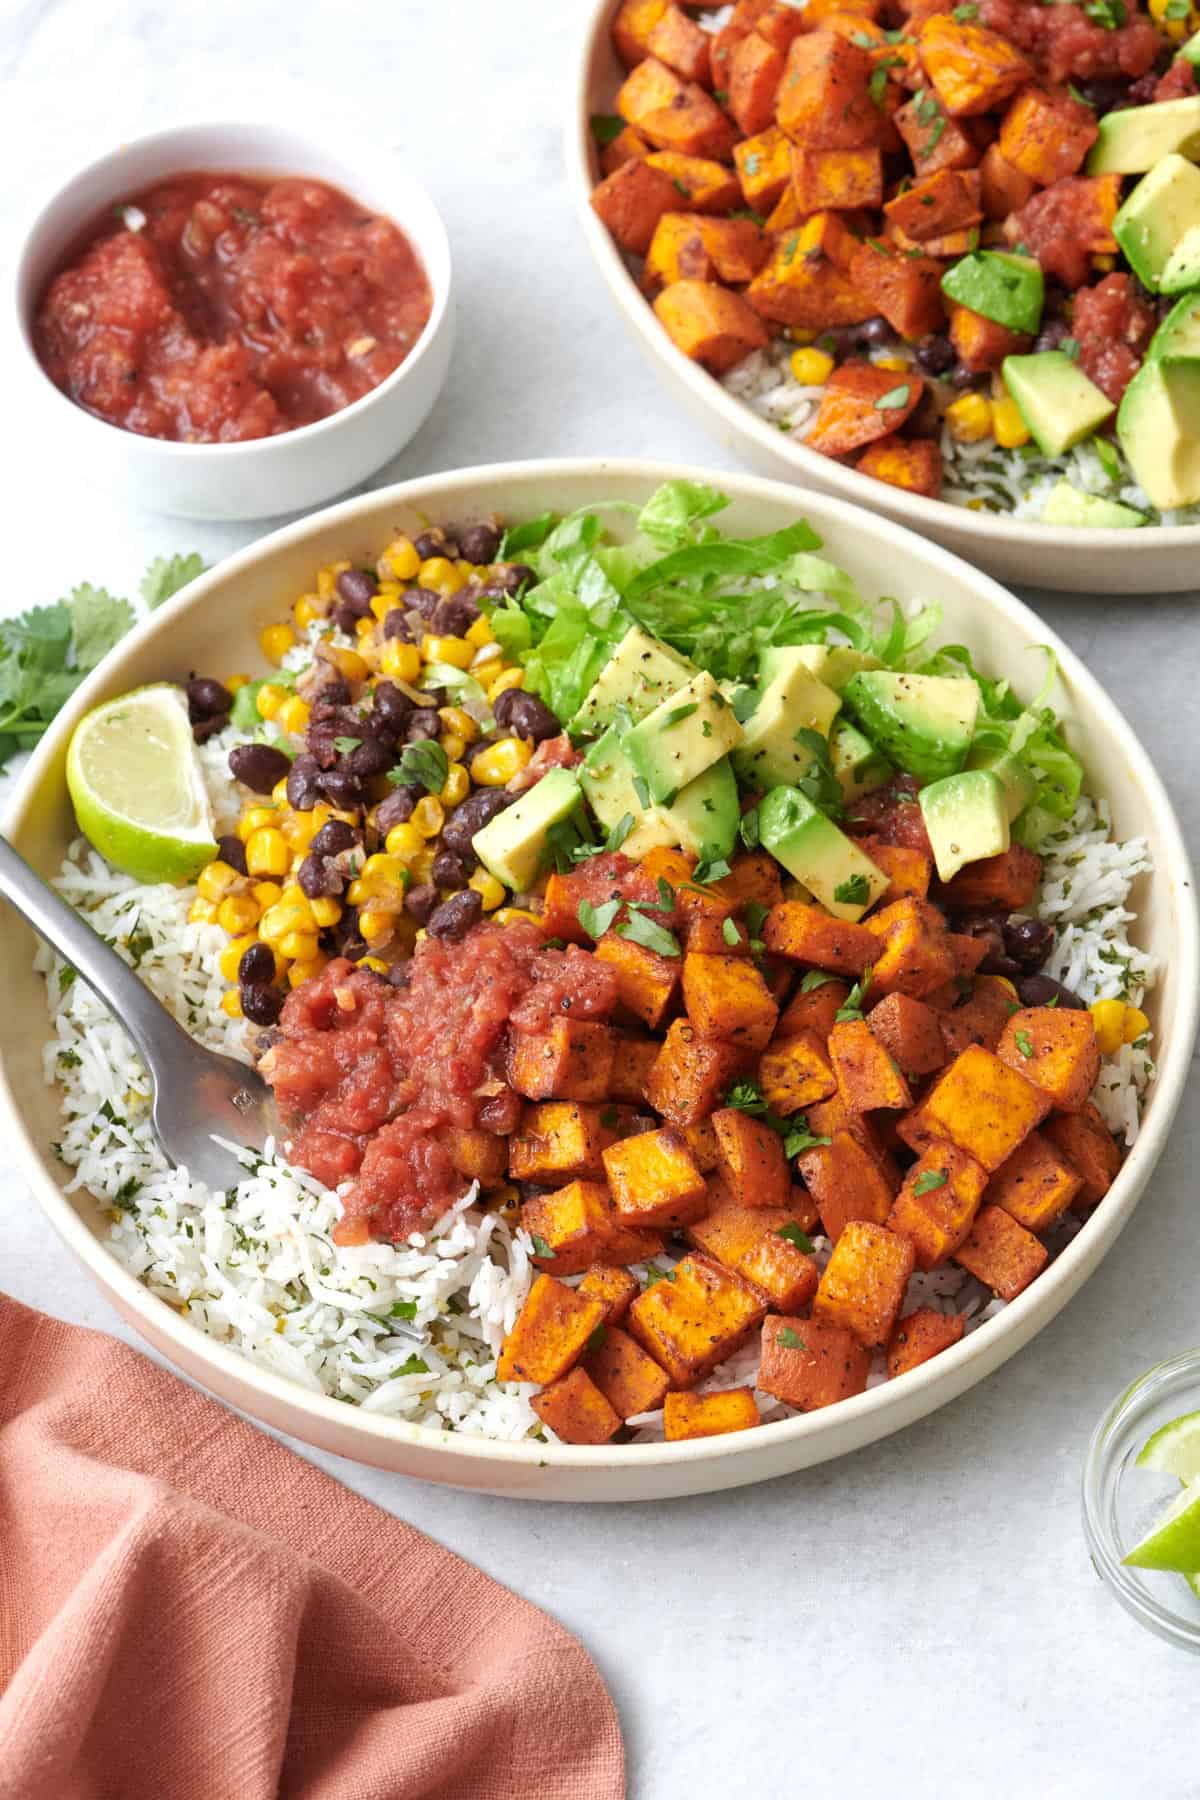 Two vegetarian burrito bowls made with sweet potatoes, black bean and corn, cilantro lime rice, lettuce, avocado, salsa, and lime wedges.